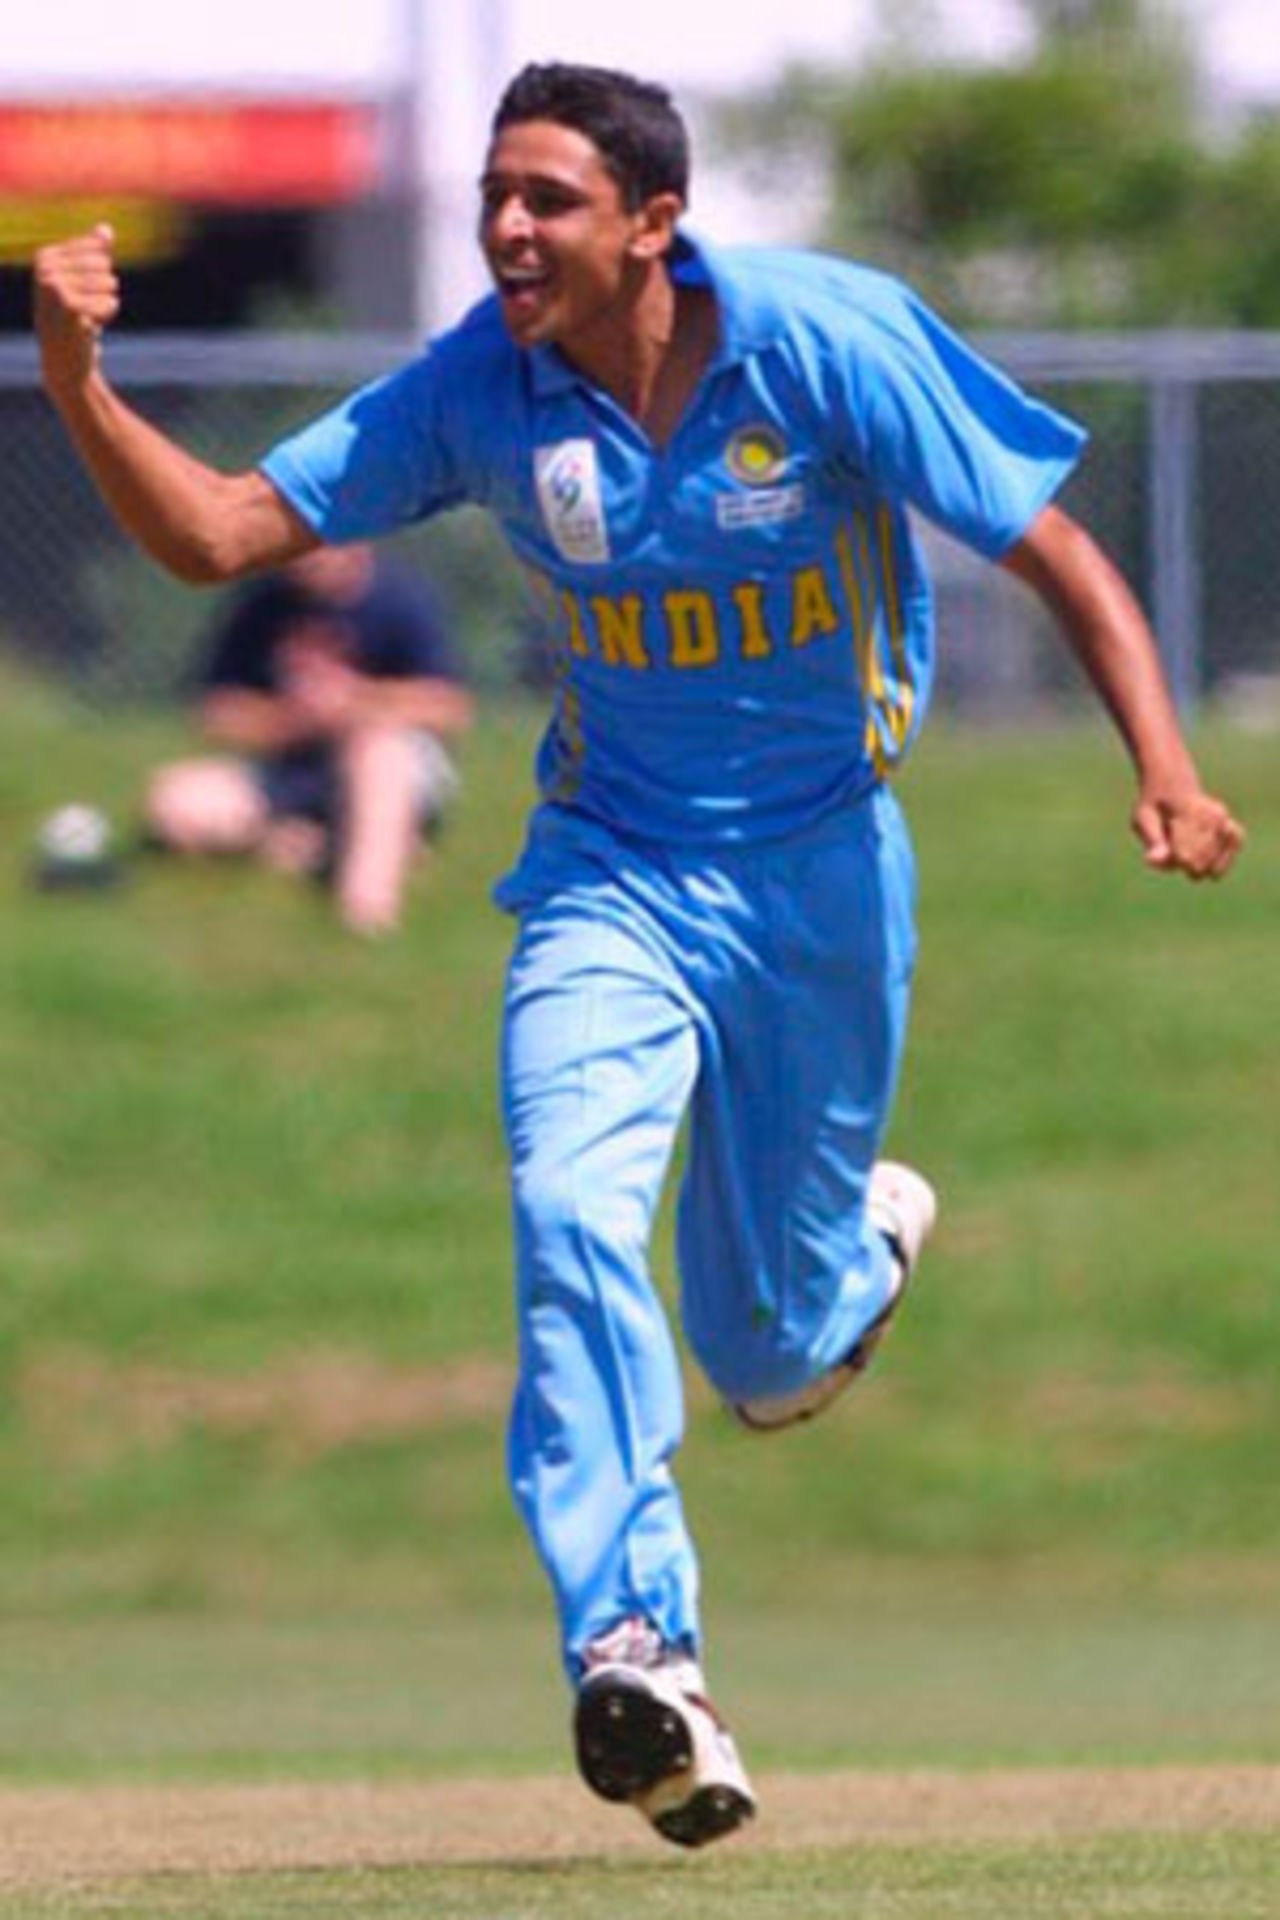 India Under-19 bowler Maninder Bisla celebrates the dismissal of South Africa Under-19 batsman Hashim Amla, caught by Paul Valthaty for 0. ICC Under-19 World Cup Group A: India Under-19s v South Africa Under-19s at North Harbour Stadium, Auckland, 23 January 2002.